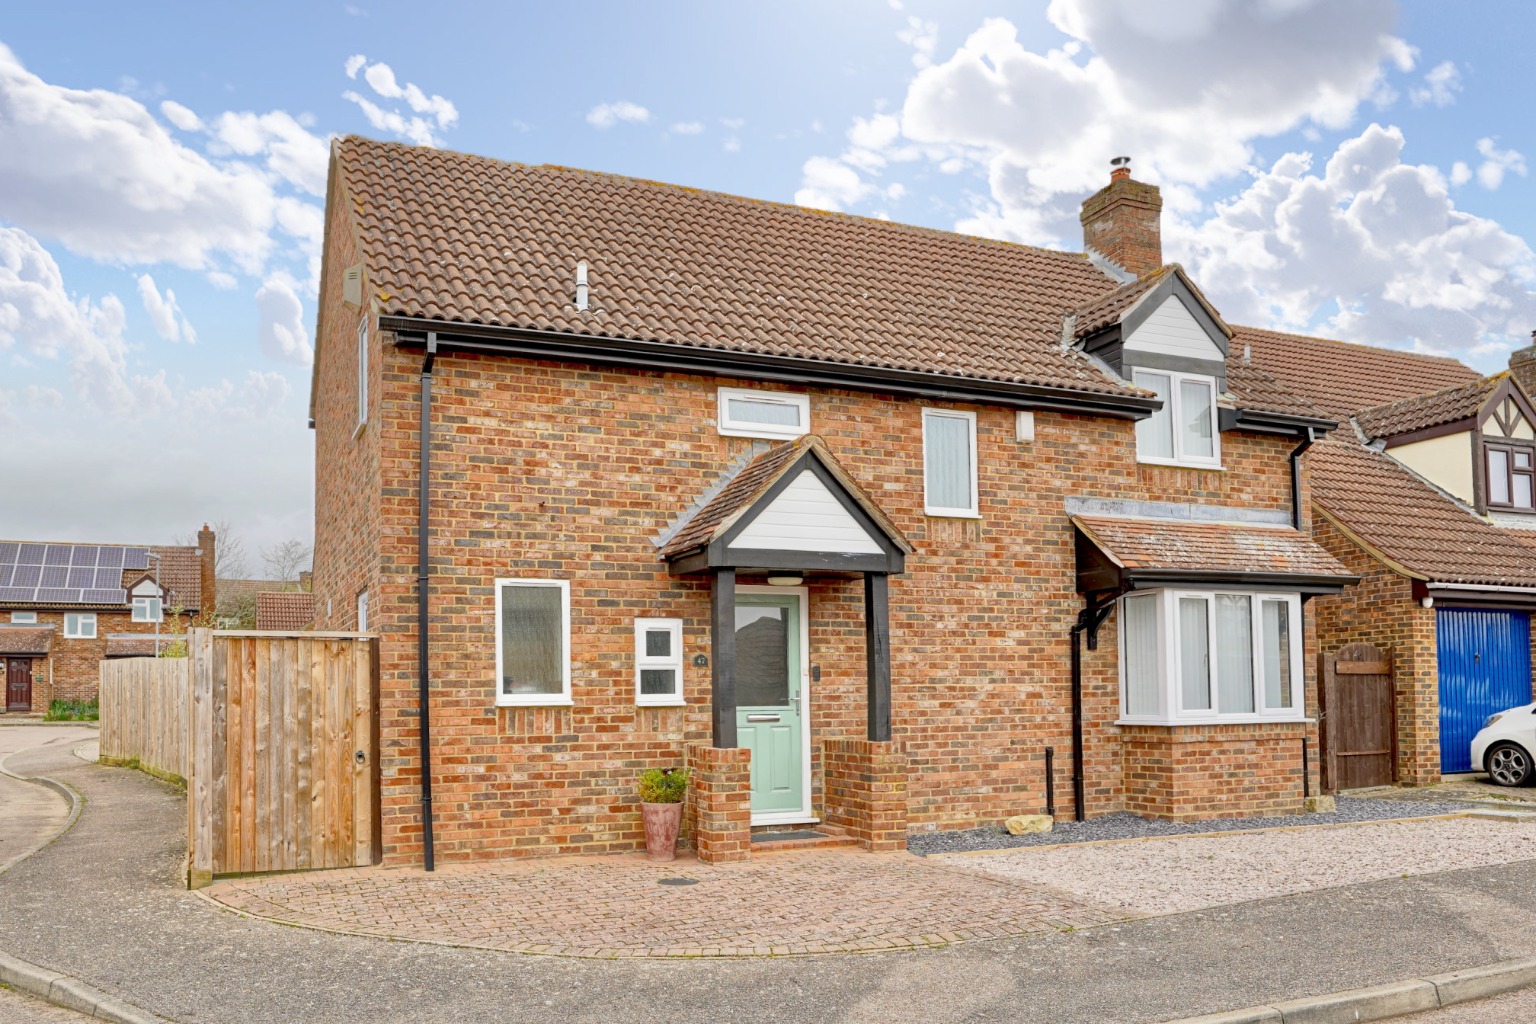 4 bed detached house for sale in Hunters Way, Huntingdon - Property Image 1